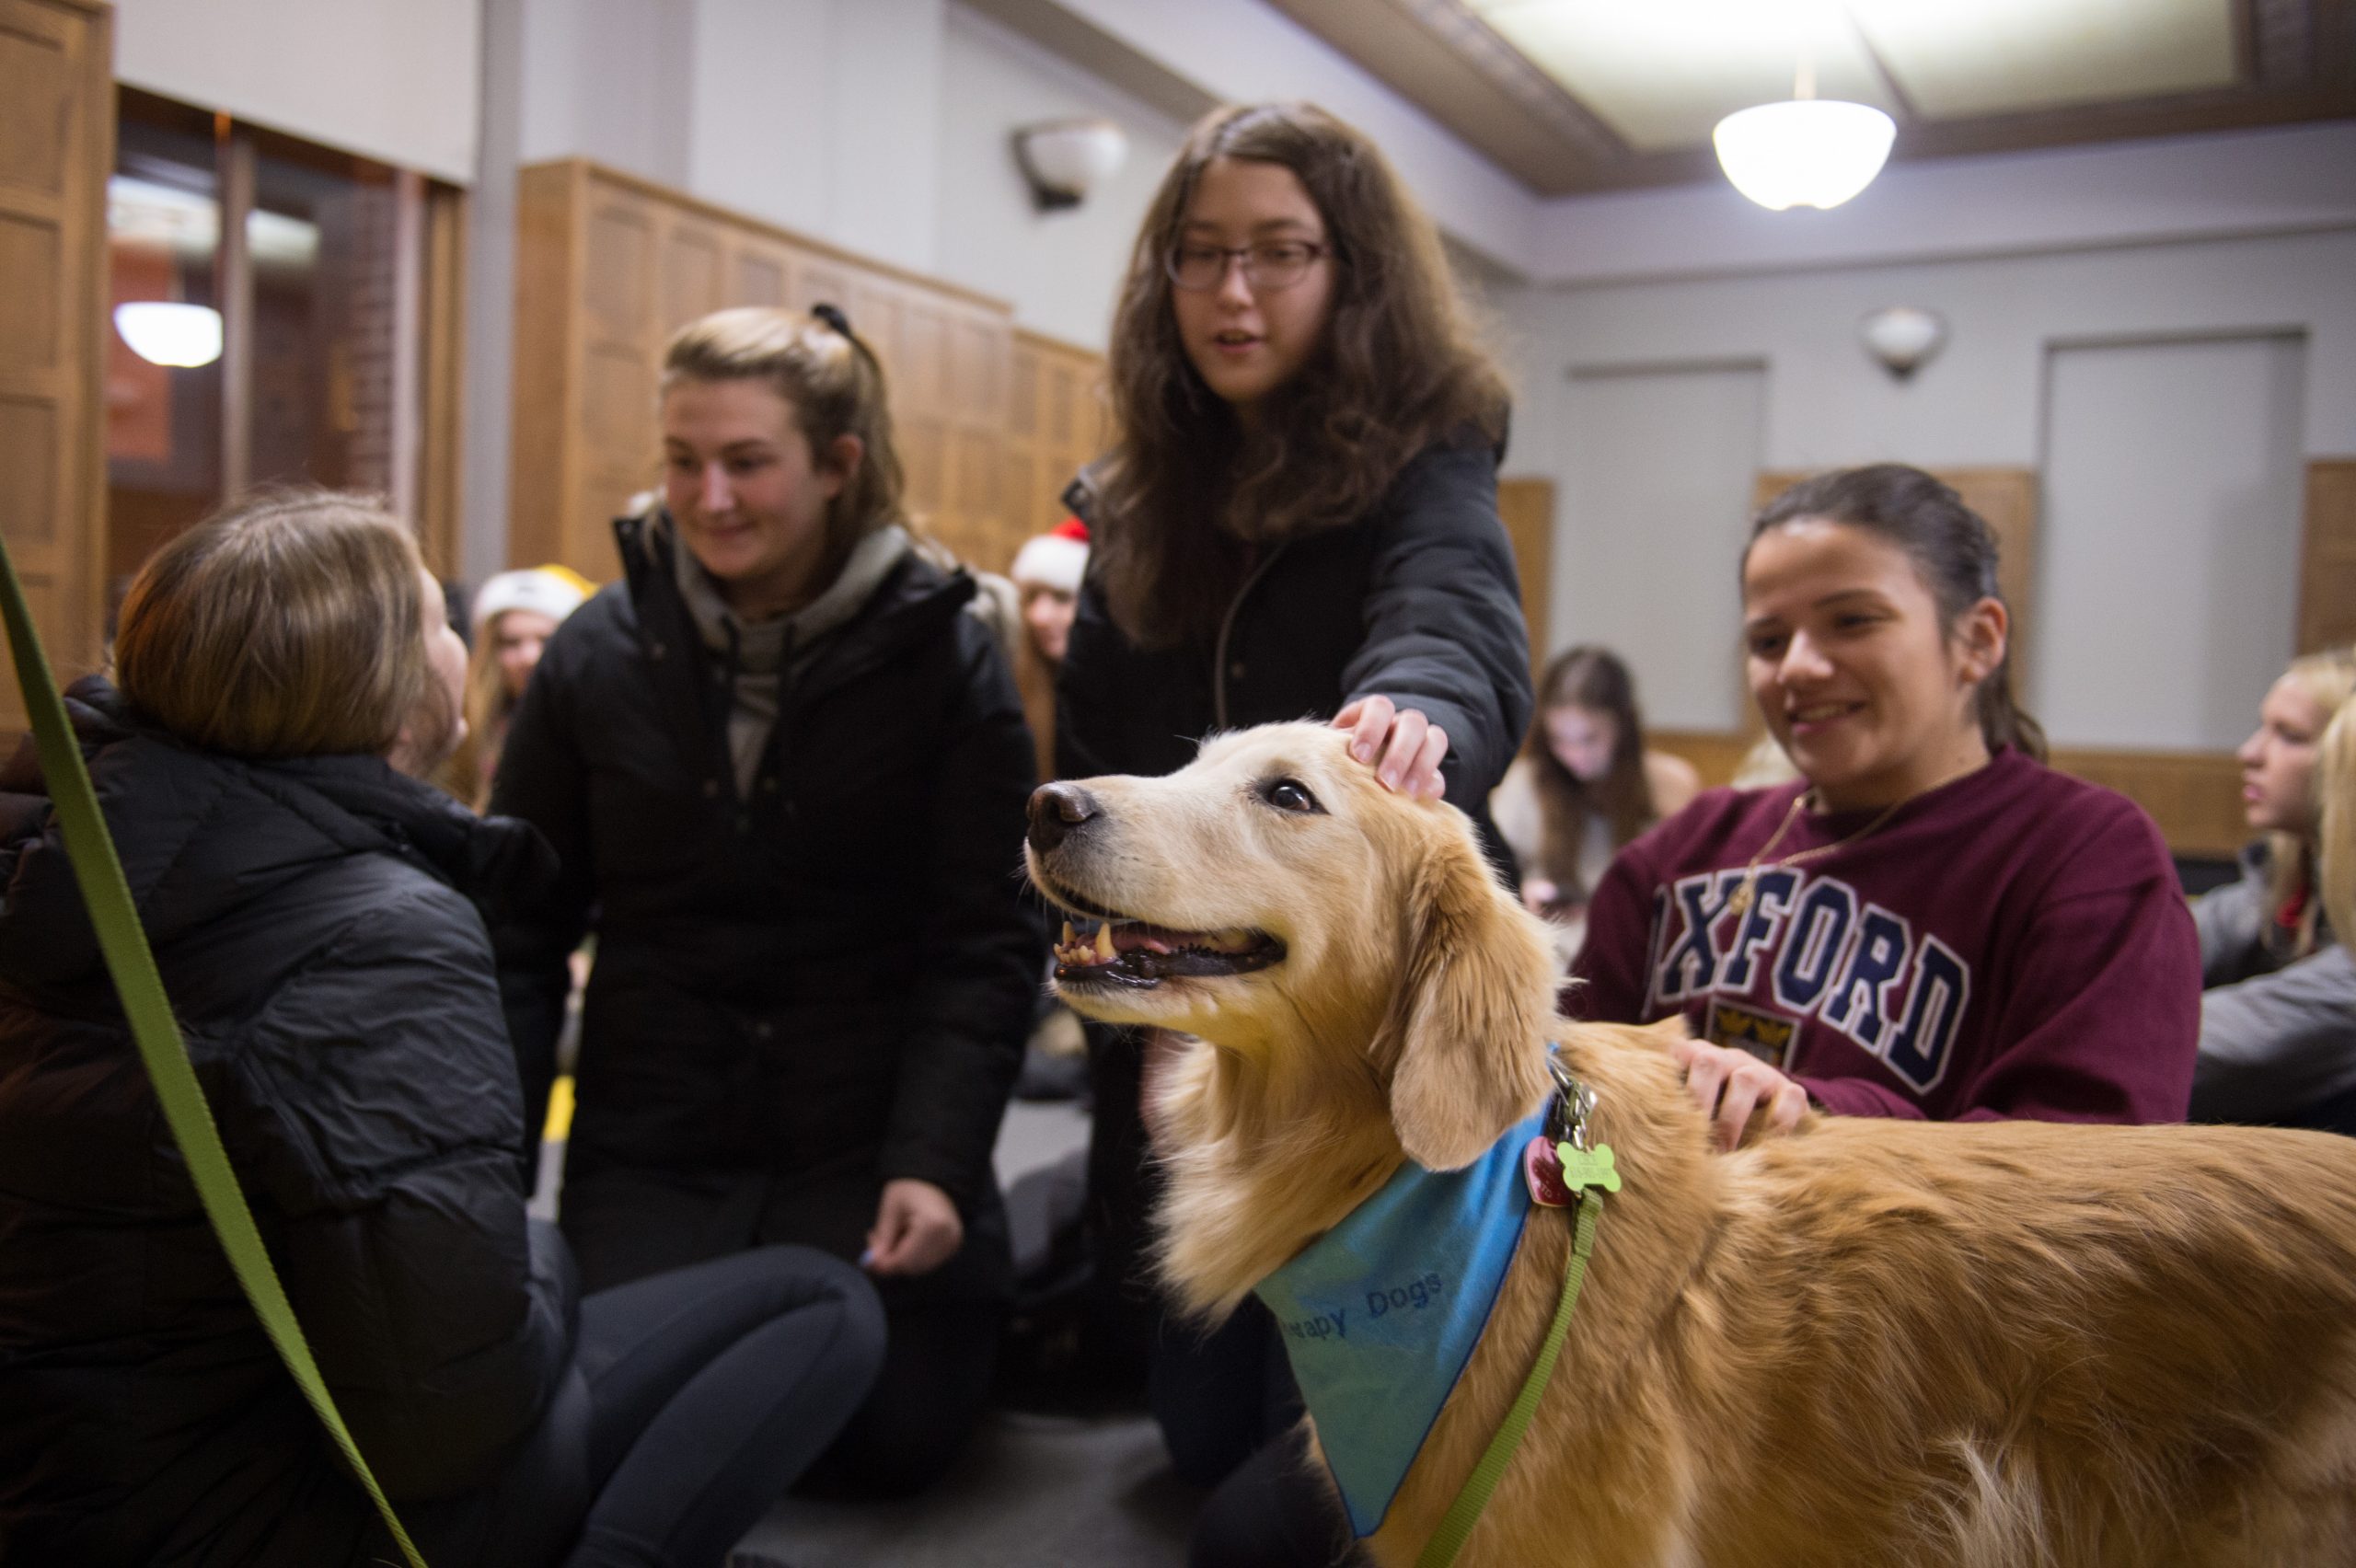 A group of students surround a large white and orange therapy dog. One of the students is petting the dog on its head.